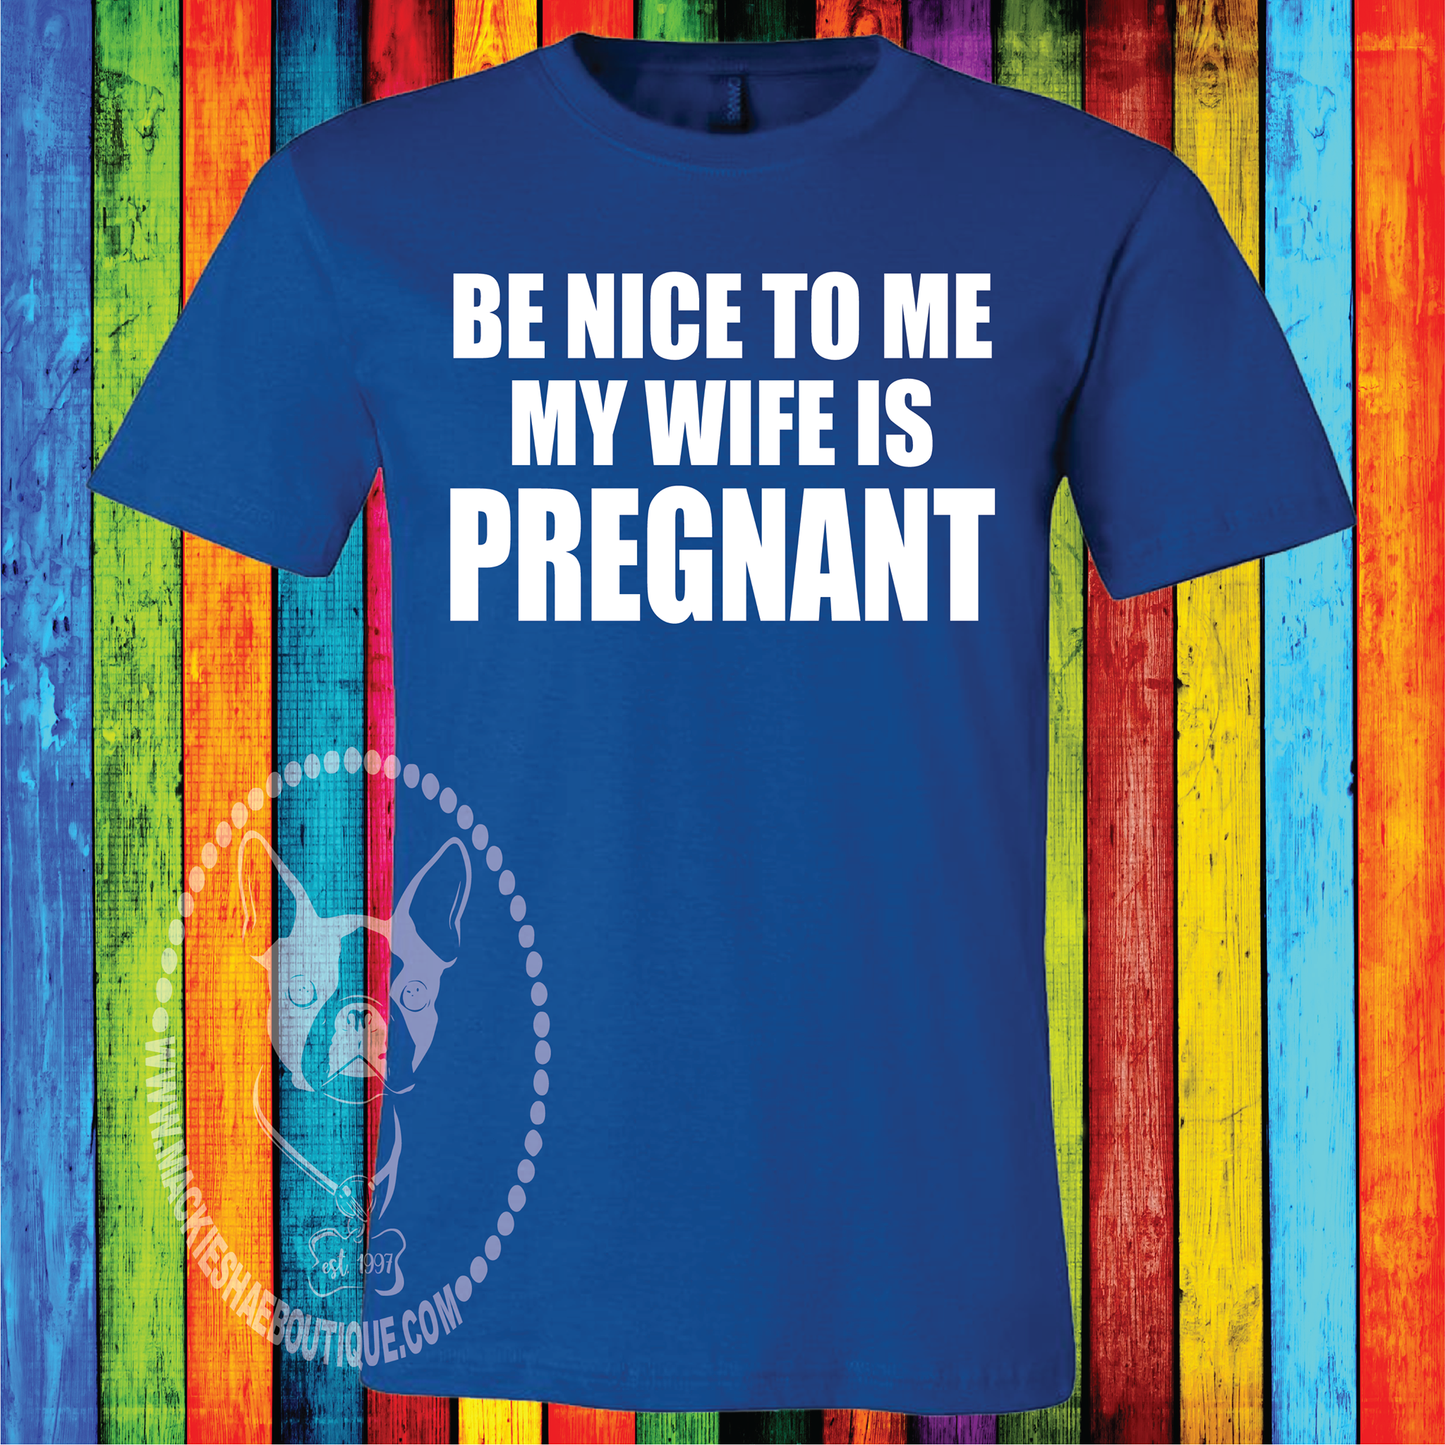 Be Nice to Me My Wife is Pregnant Custom Shirt, Short Sleeve